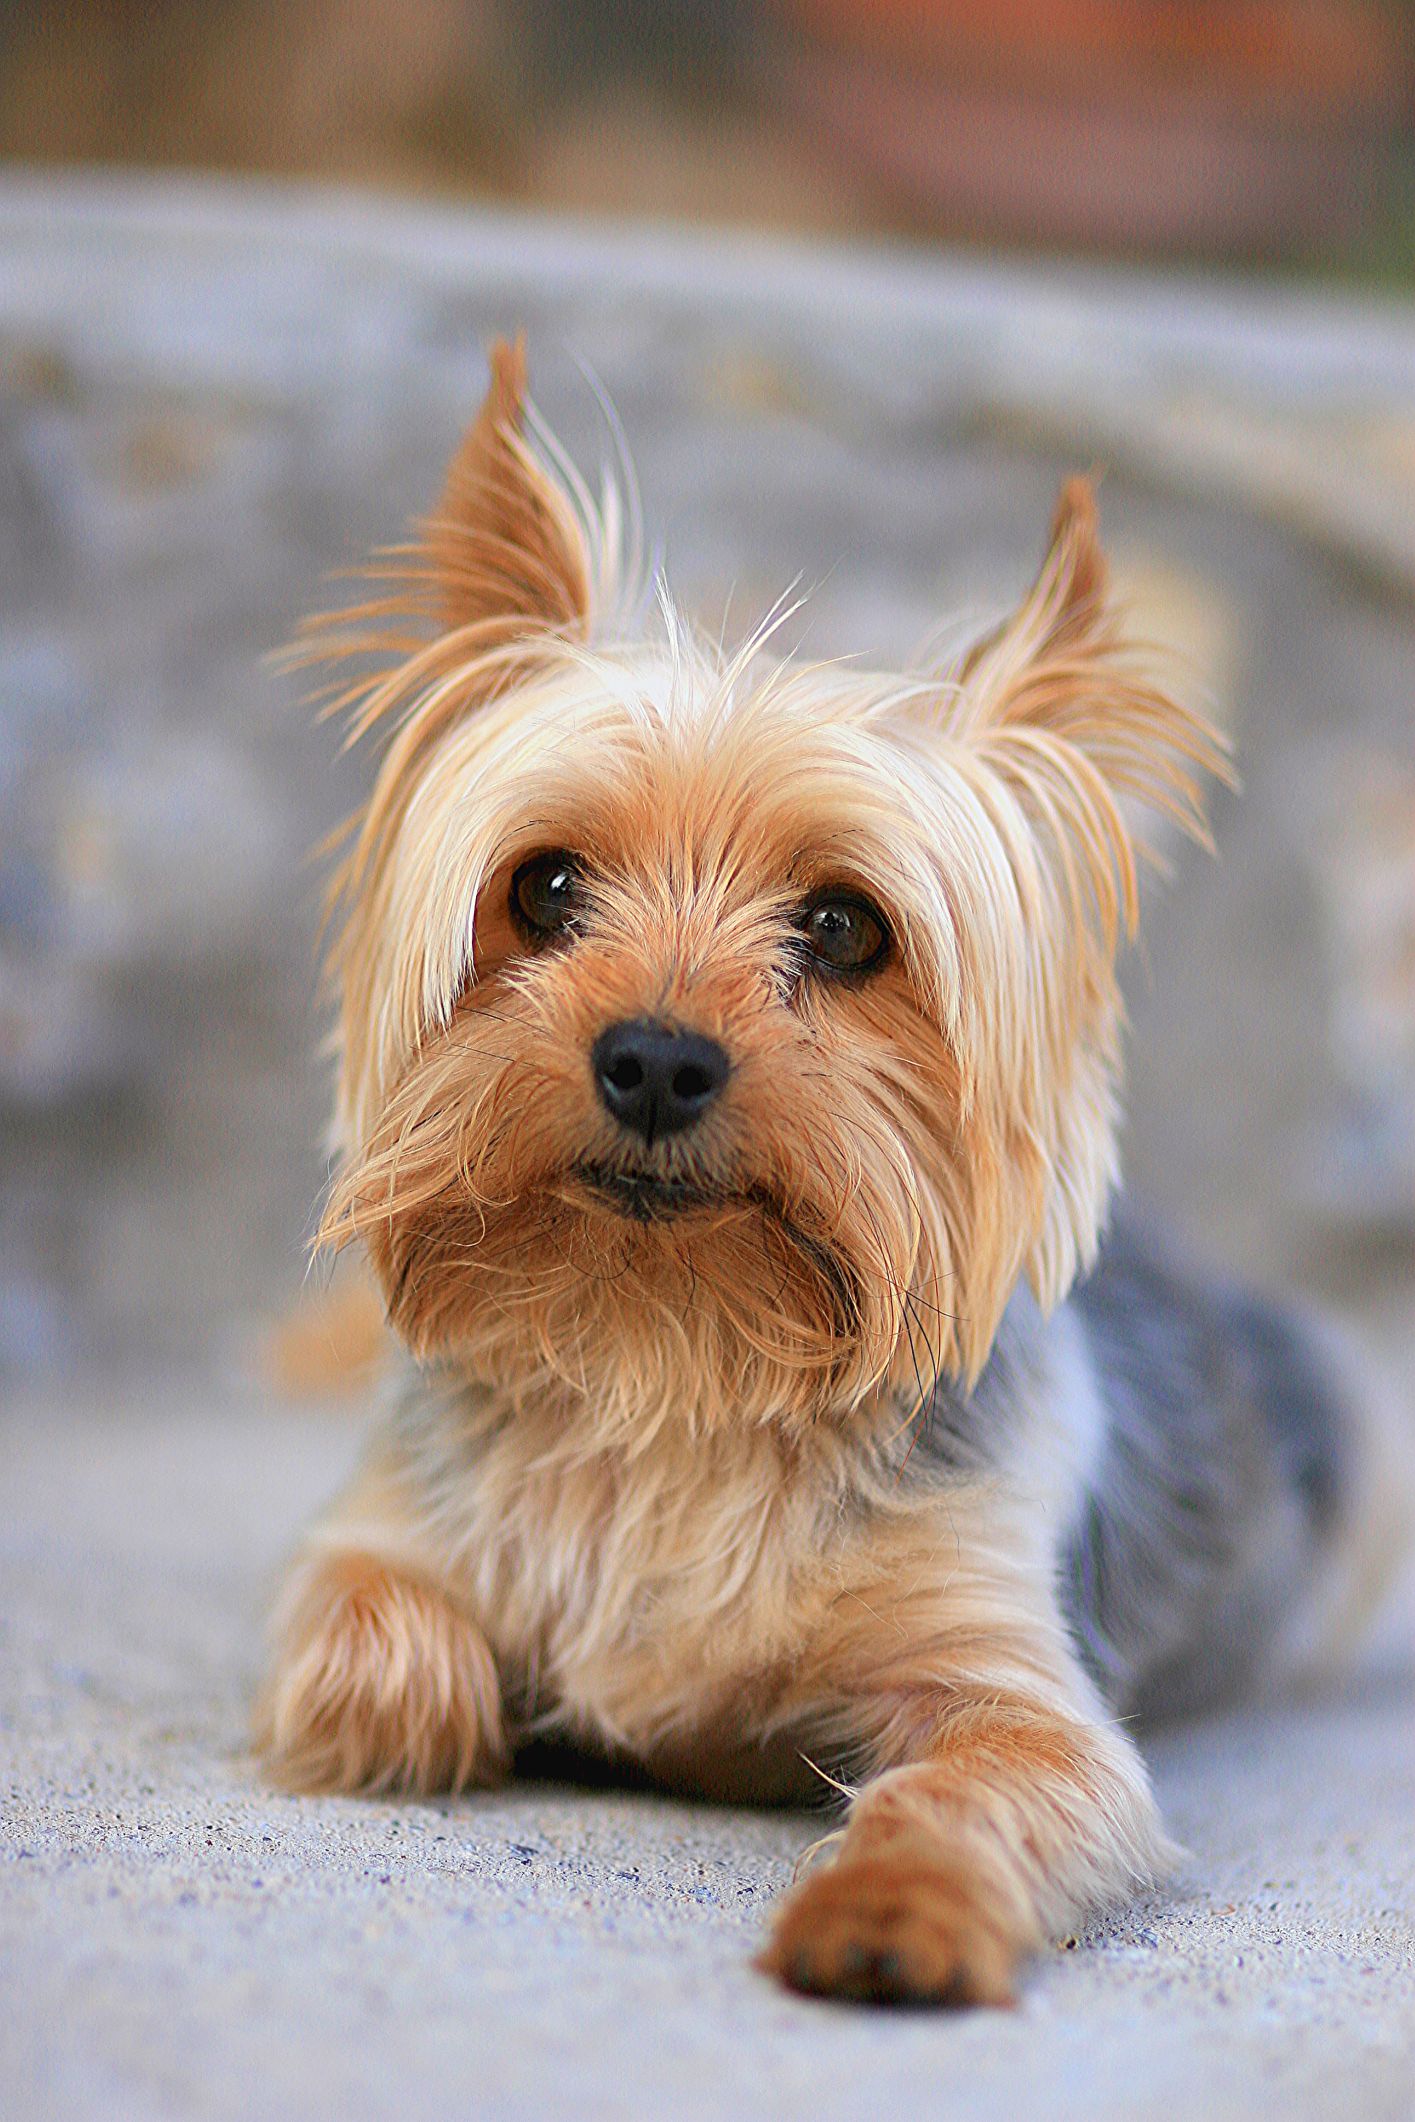 different small dog breeds